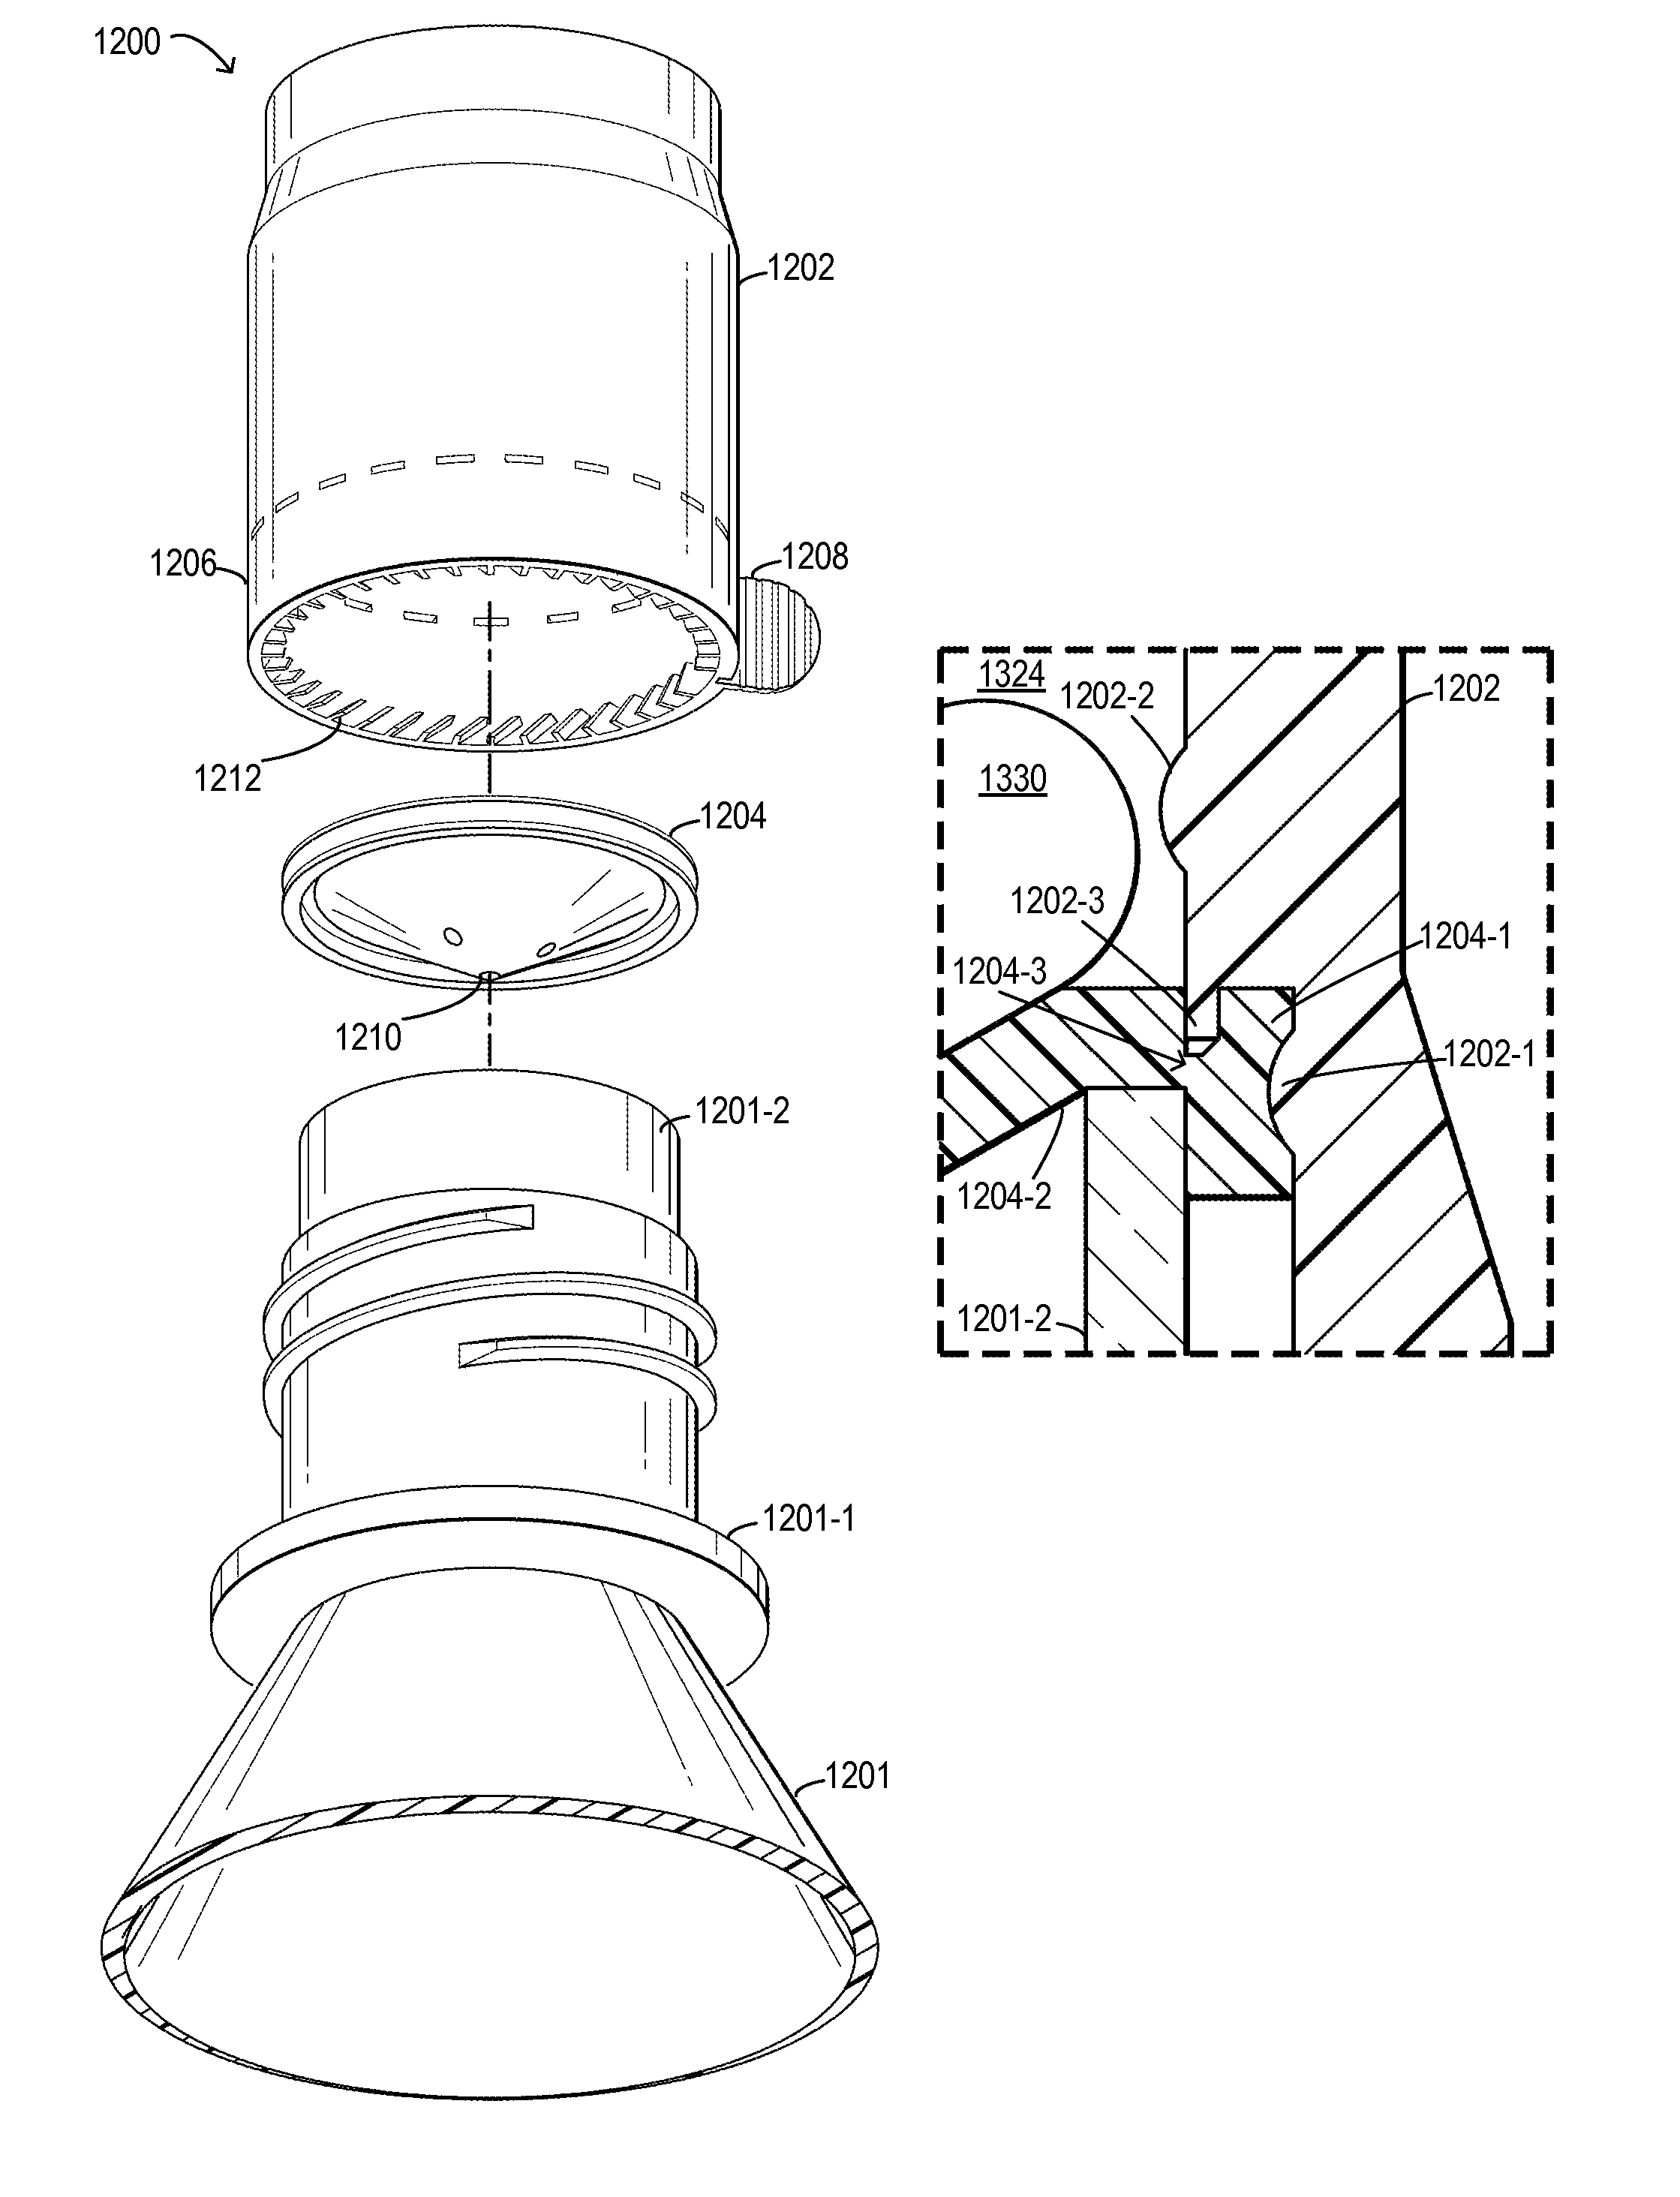 System and method for dispensing additives to a container